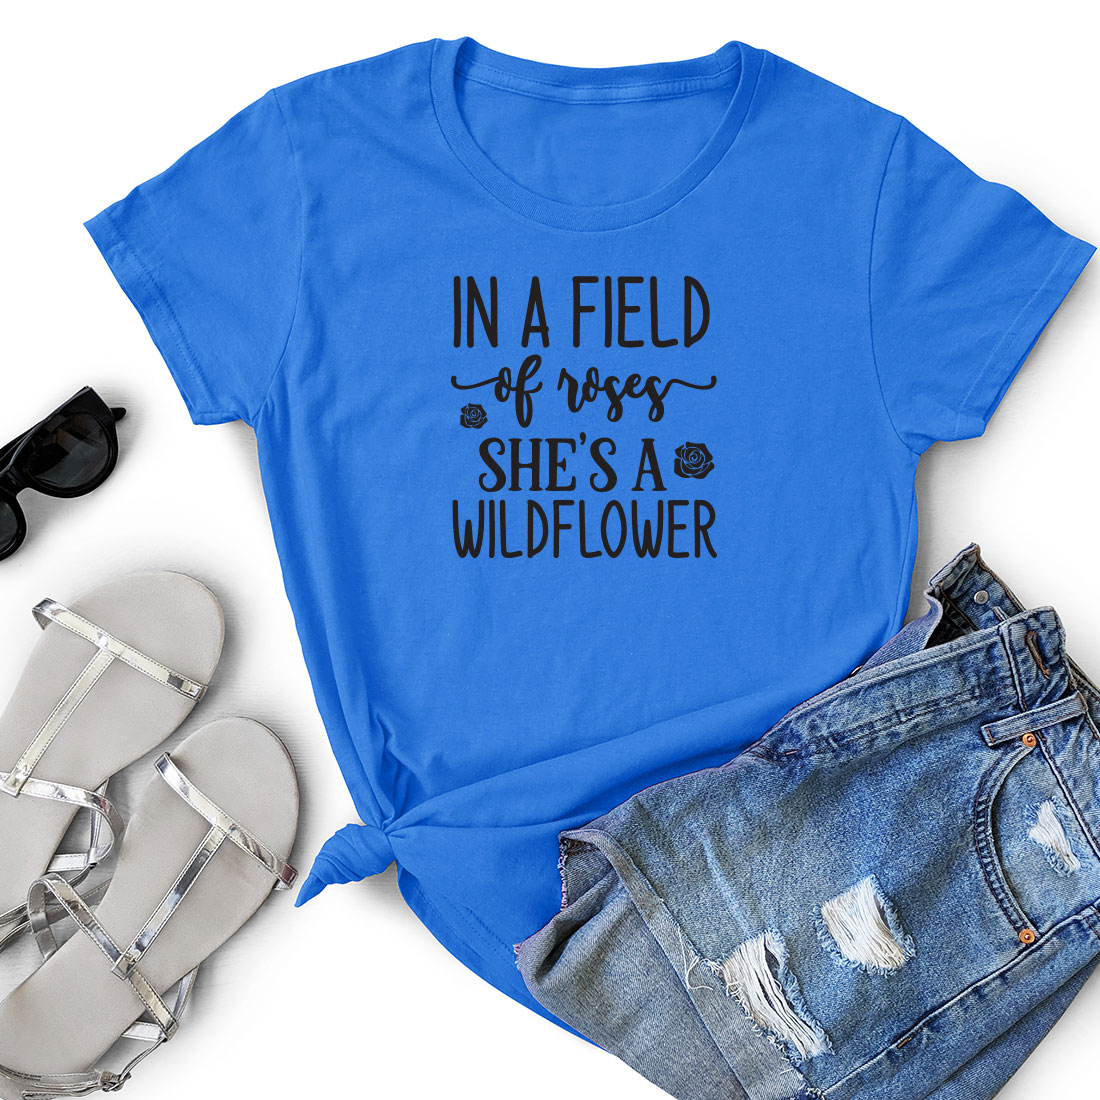 Blue shirt that says in a field she's a wildflower.